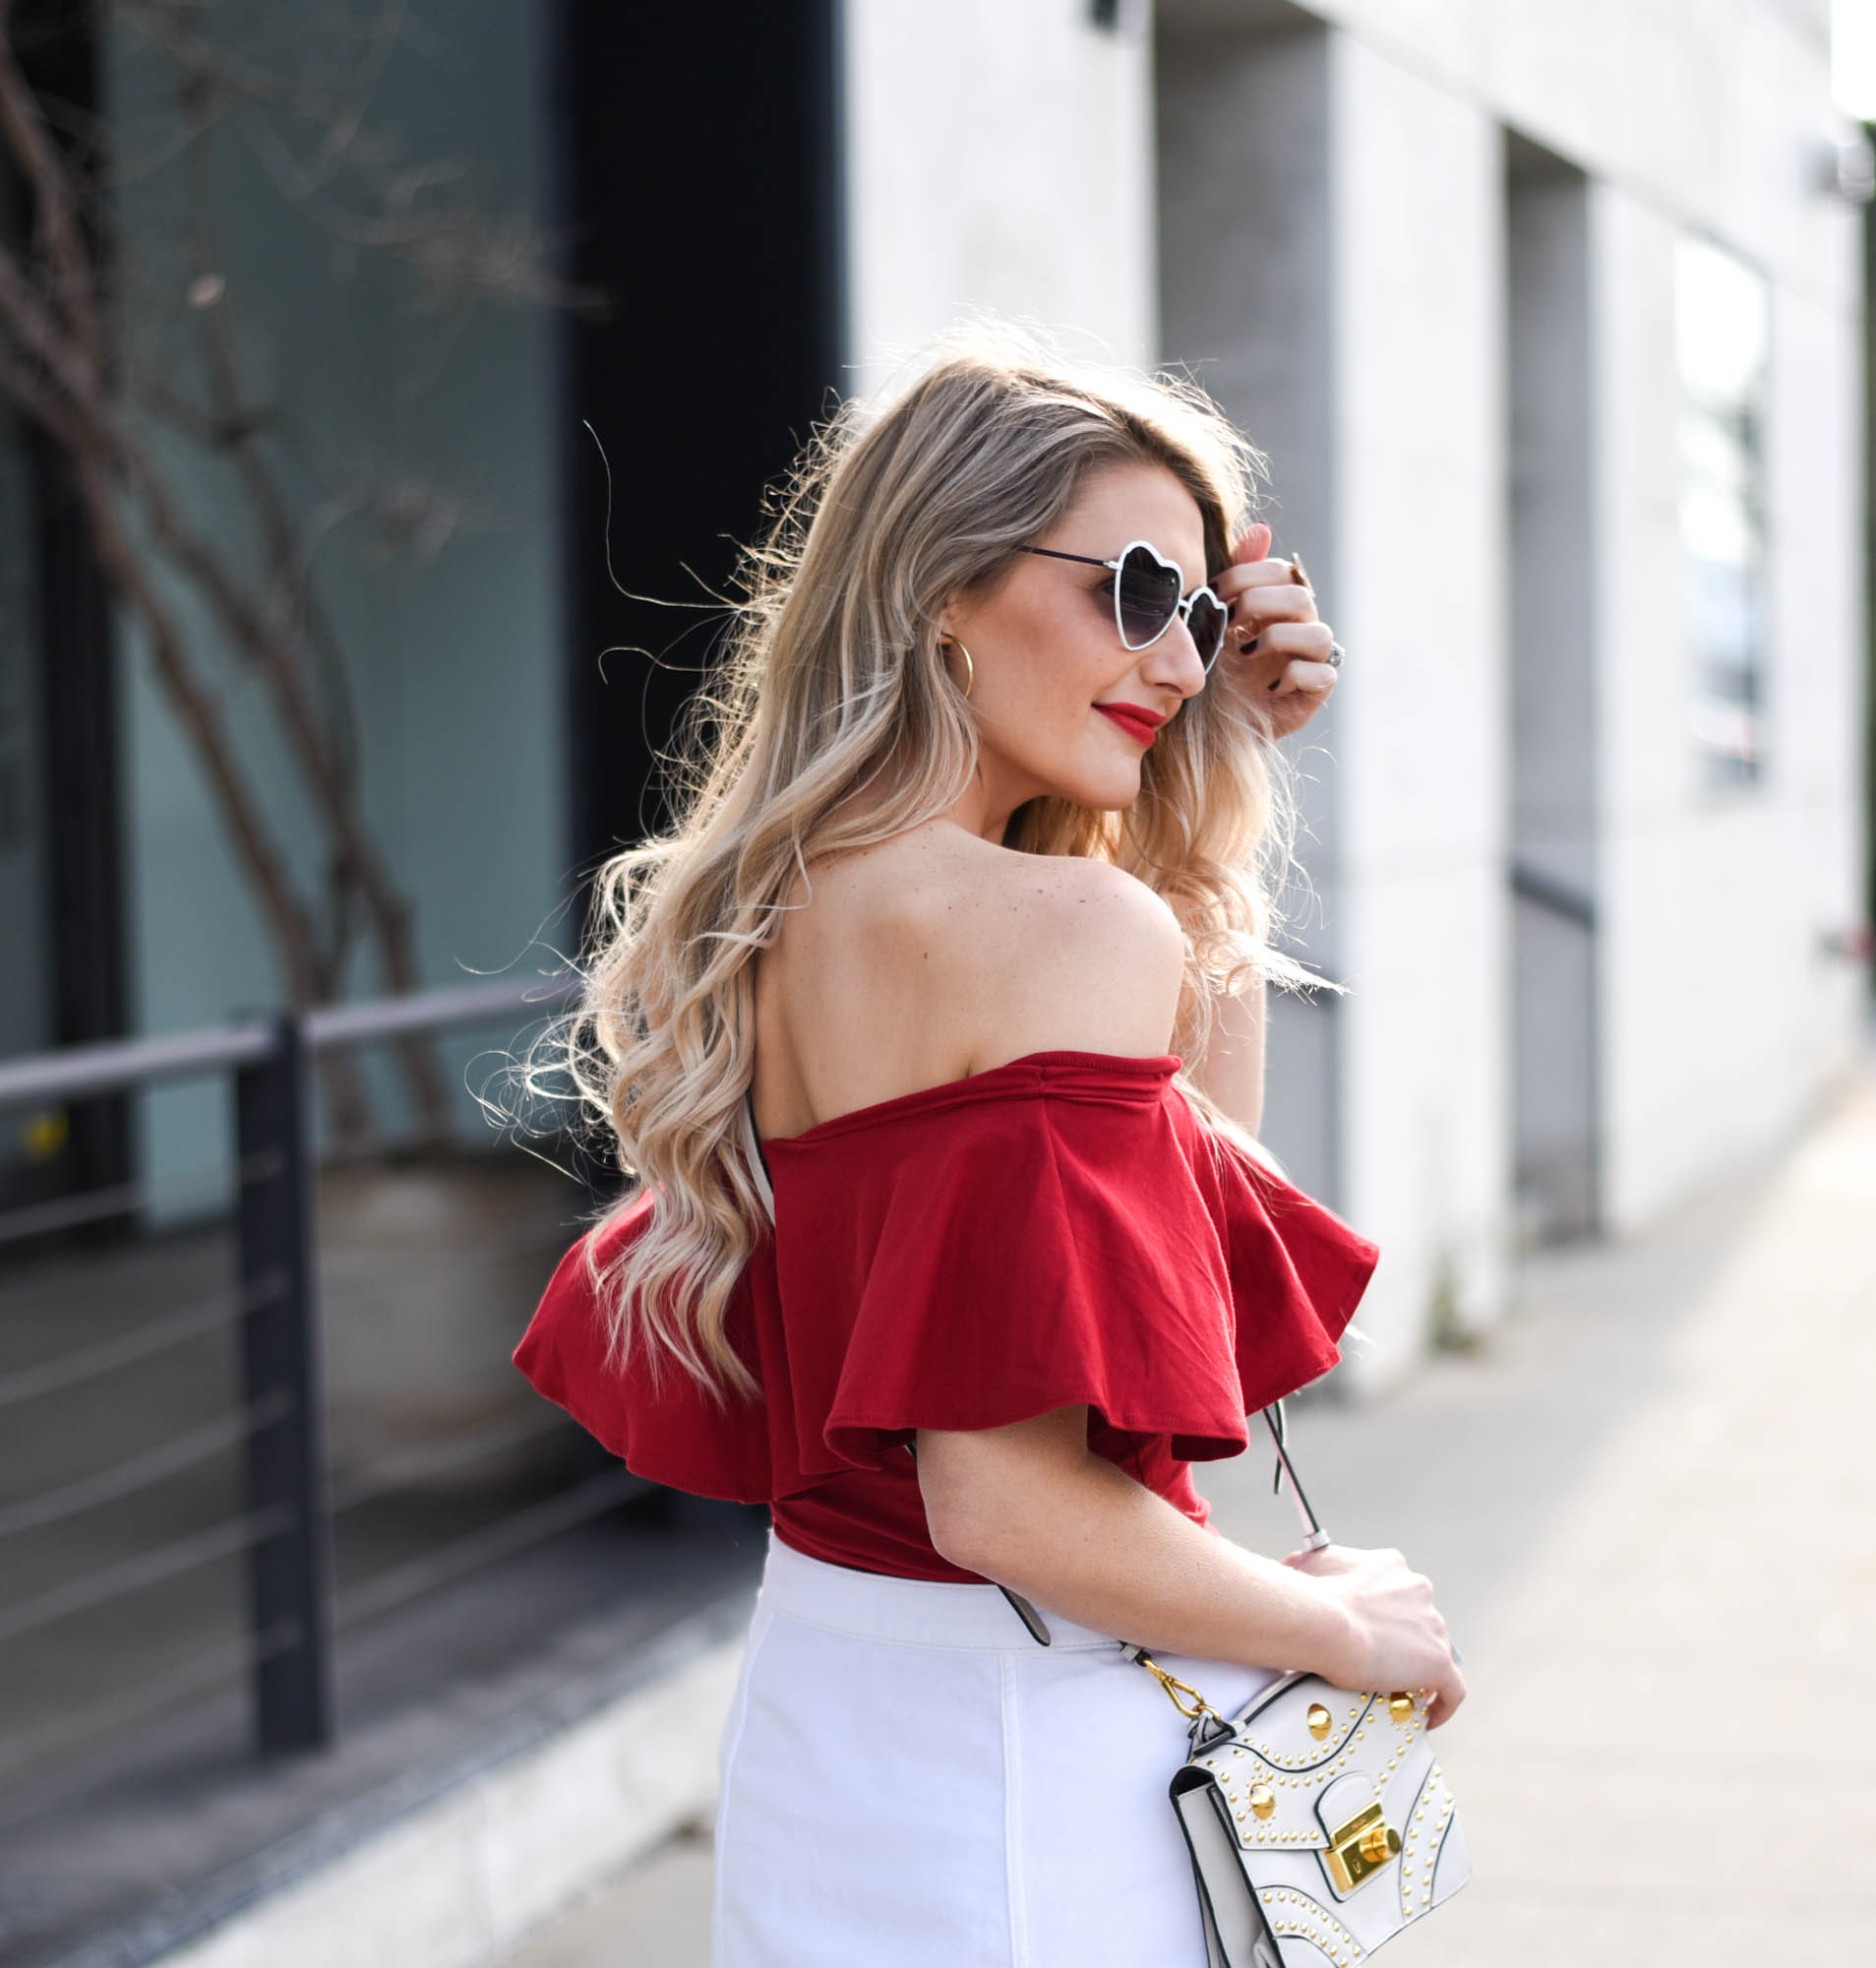 Visions of Vogue - Red Off The Shoulder 9 - 5 Date Night Outfits He Wants You to Wear by Chicago style blogger Visions of Vogue